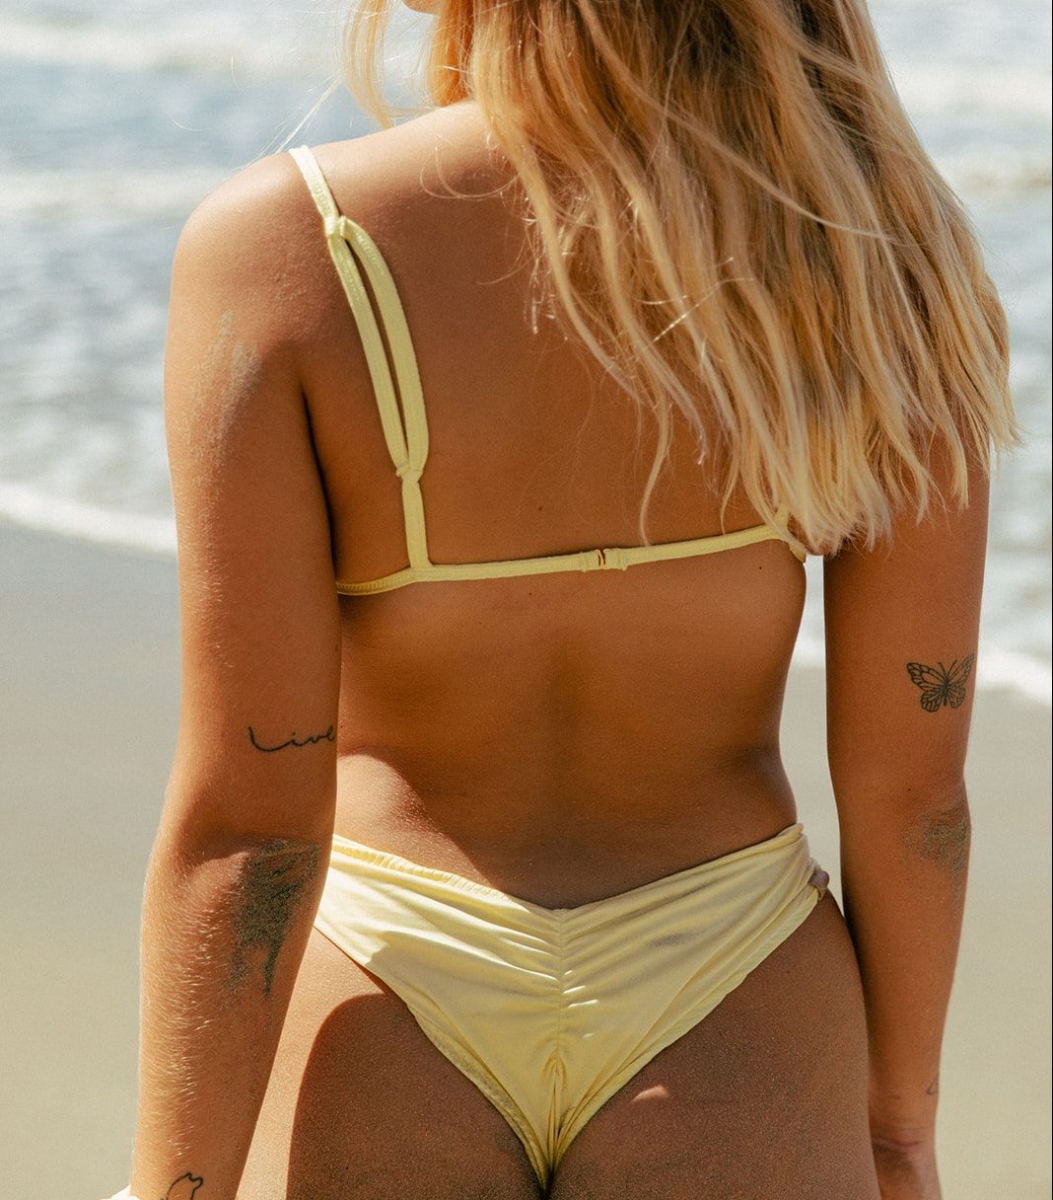 Picture of Imsy Swimwear 2121-BJU-BTR-S Justine Bottom, Butter - Small